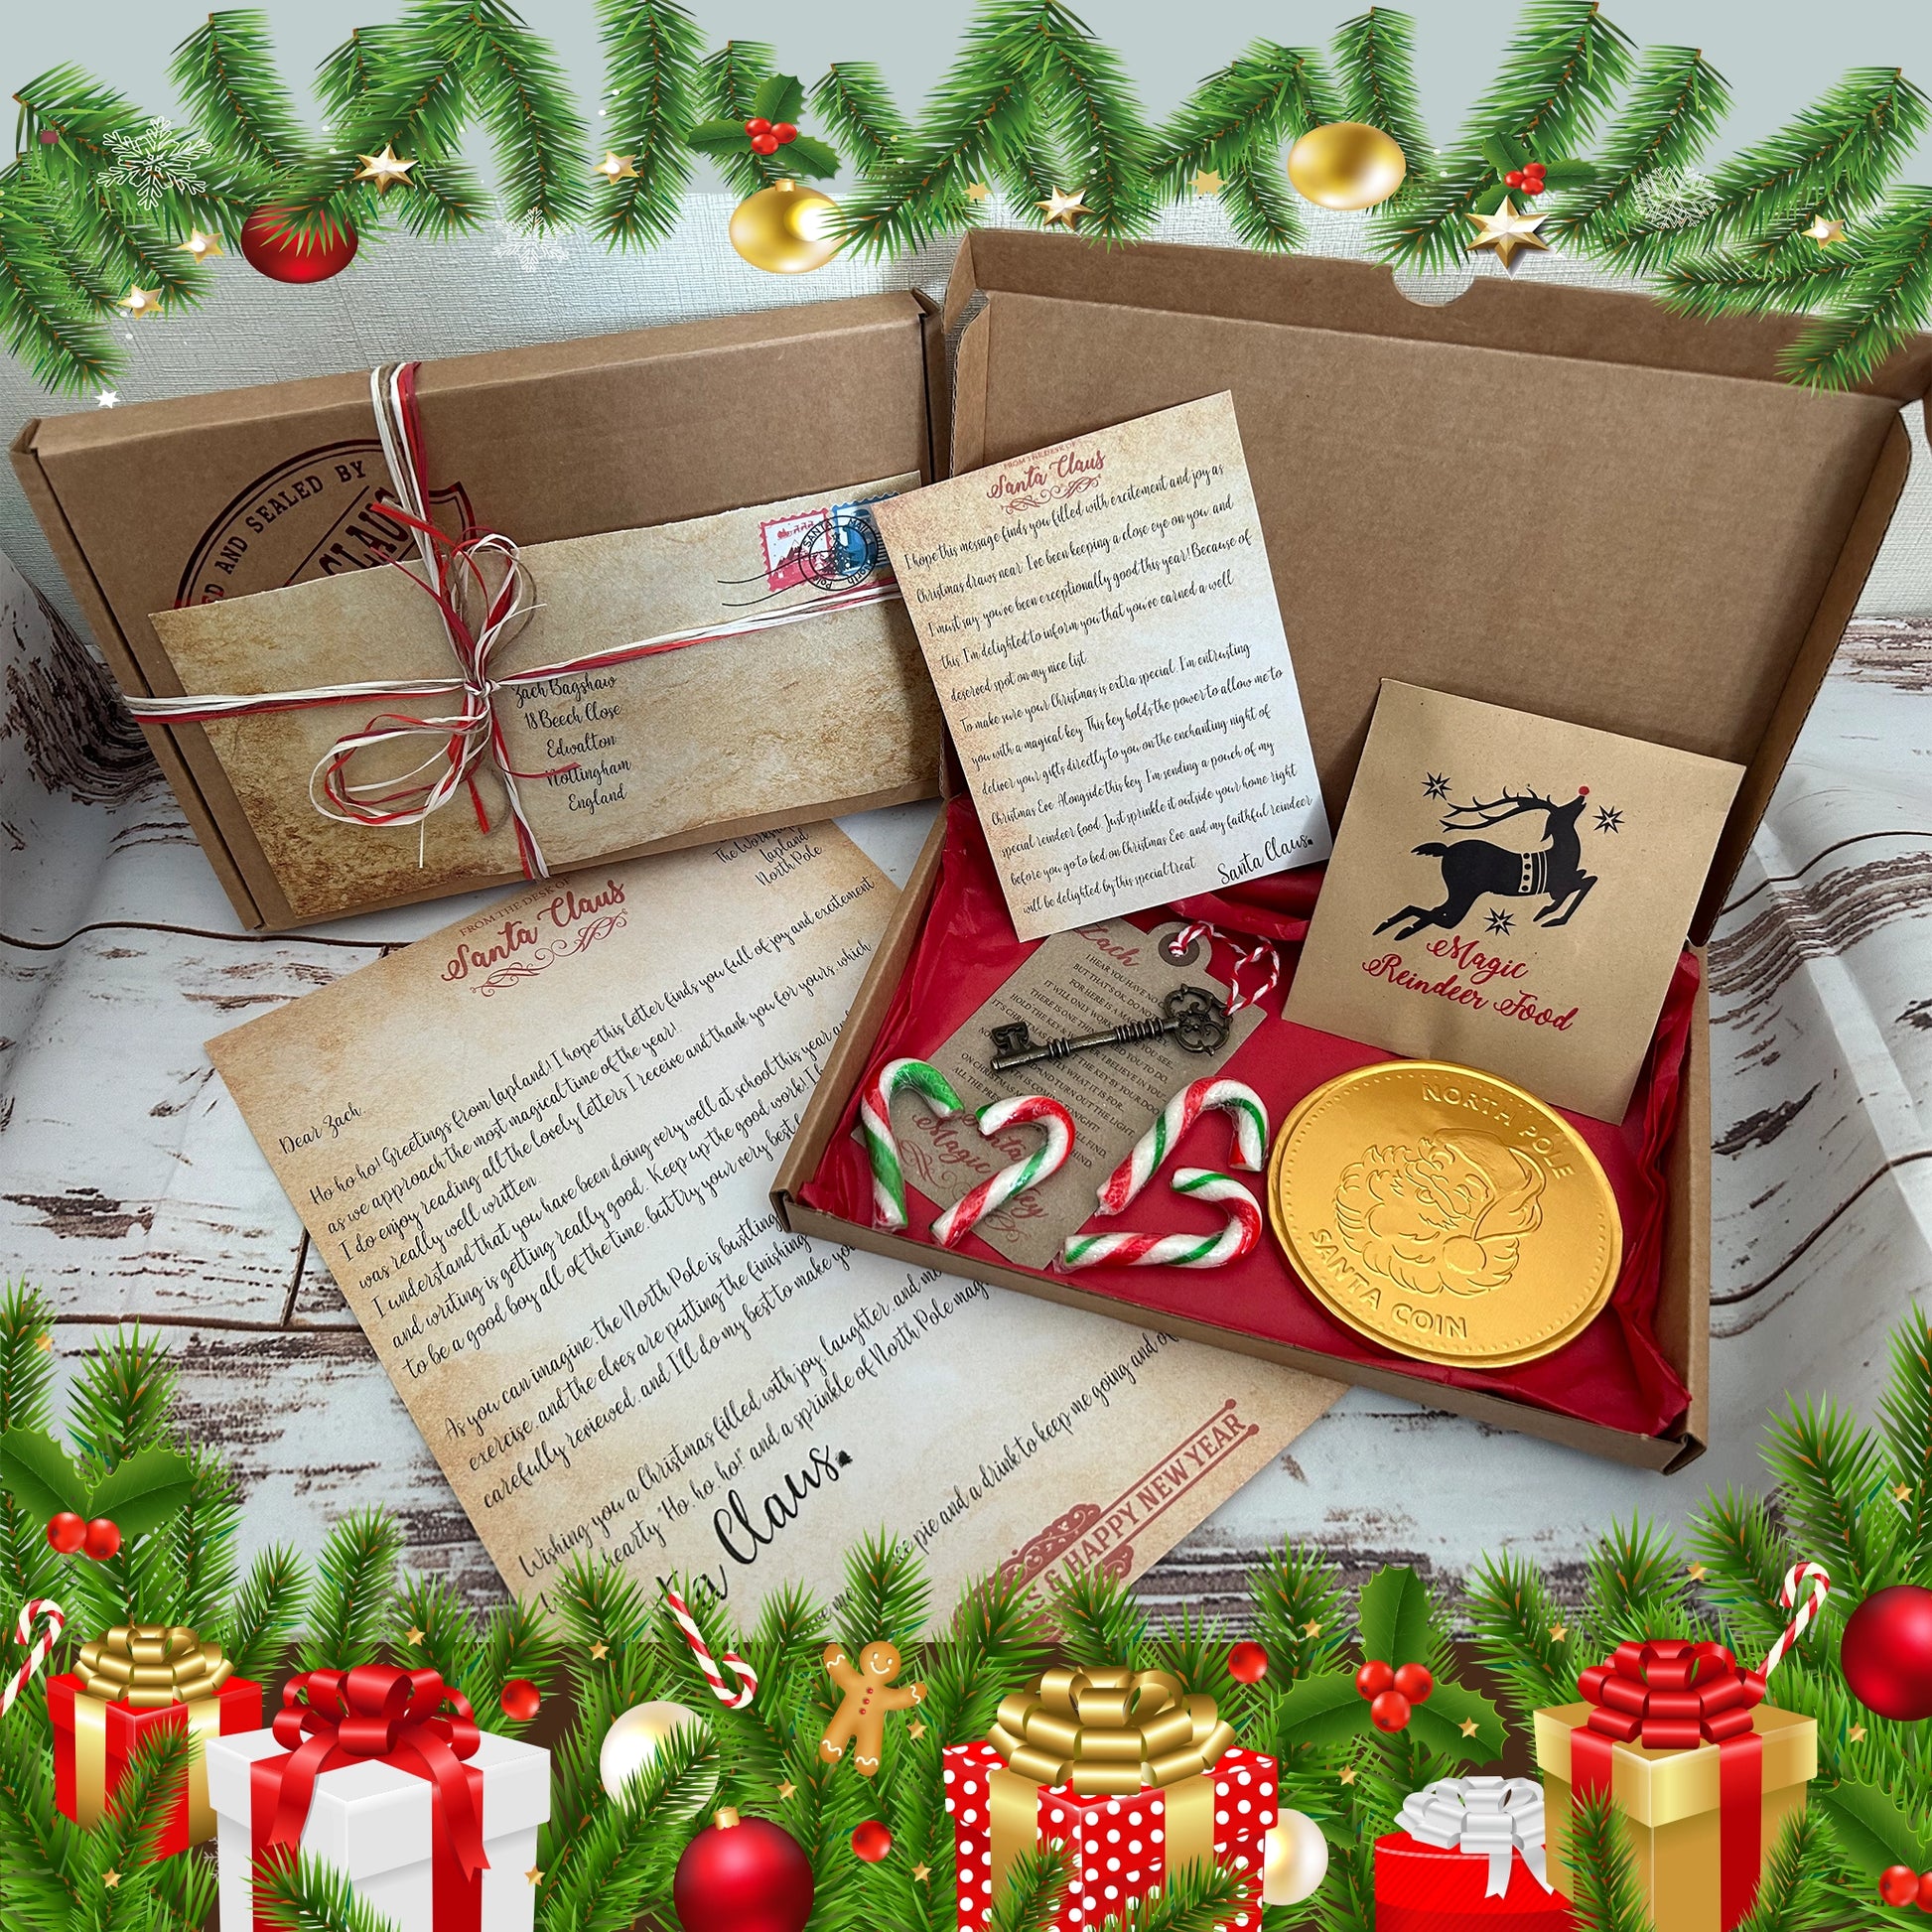 Personalised Letter from Santa, Magical Key & Reindeer Food - The Forgotten Toy Shop - The Forgotten Toy Shop